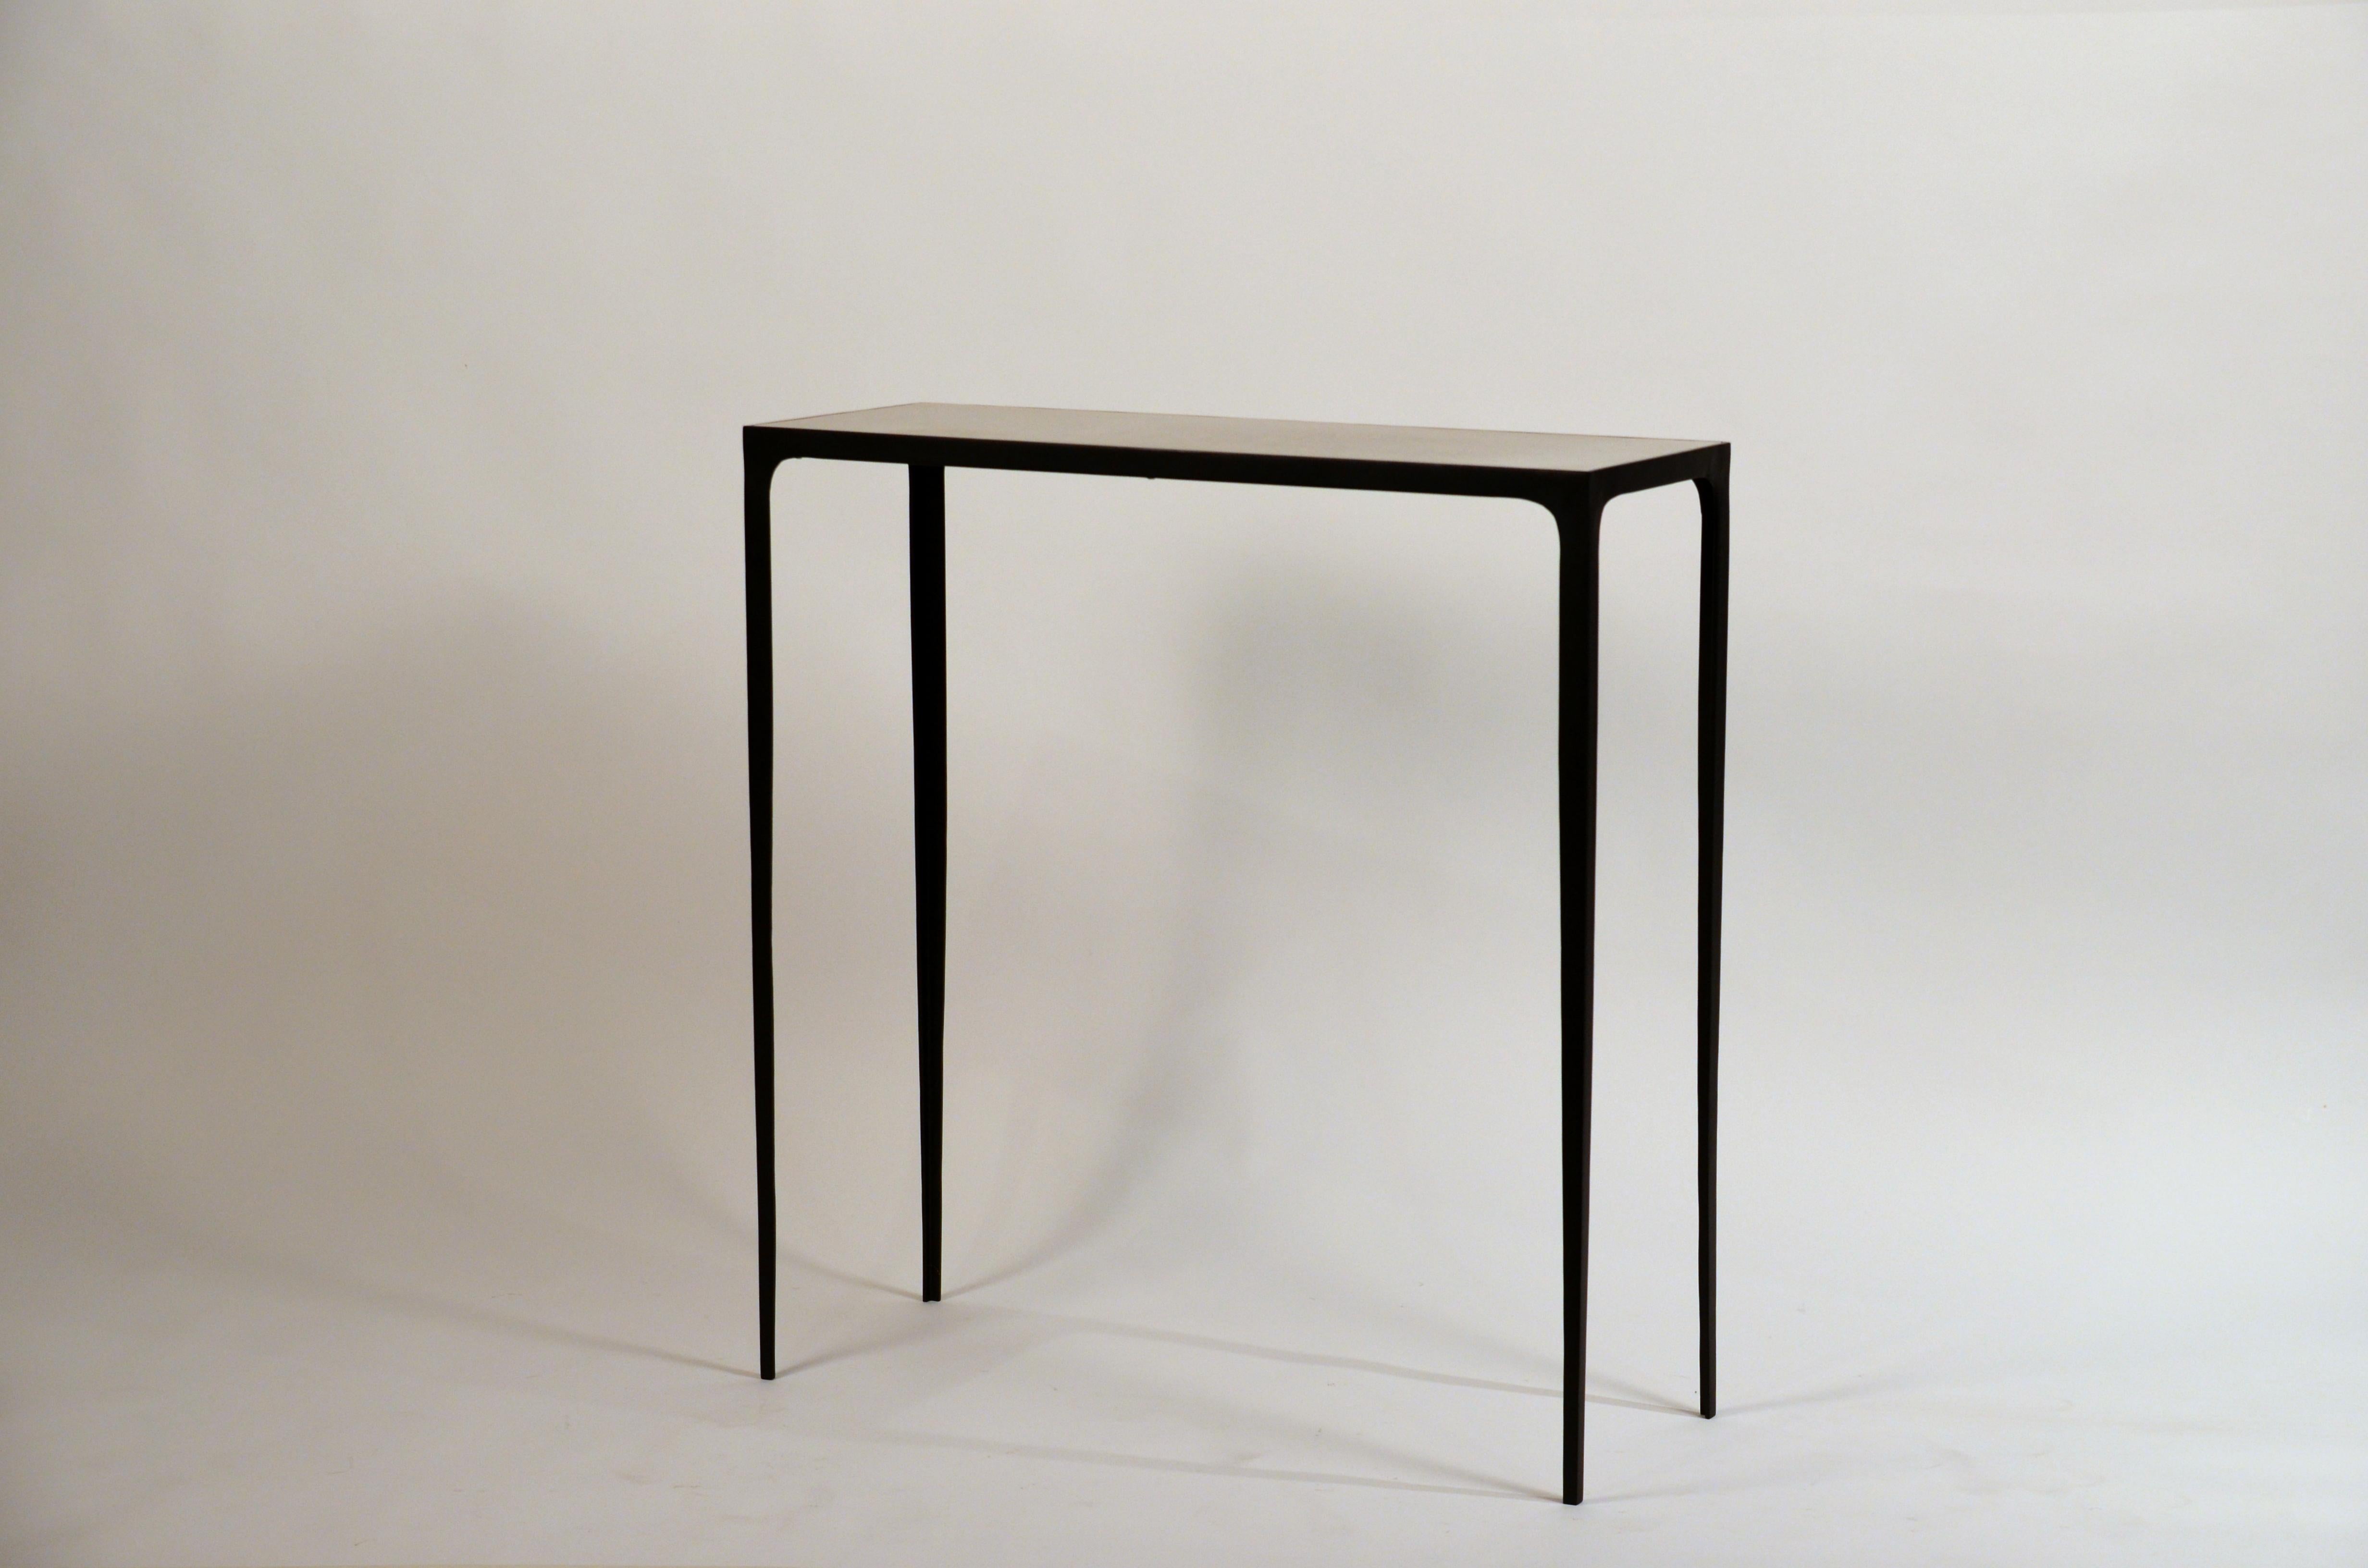 Pair of understated 'Esquisse' wrought iron and parchment consoles by Design Frères. Chic genuine parchment tops fitted onto a slender matte black wrought iron bases.